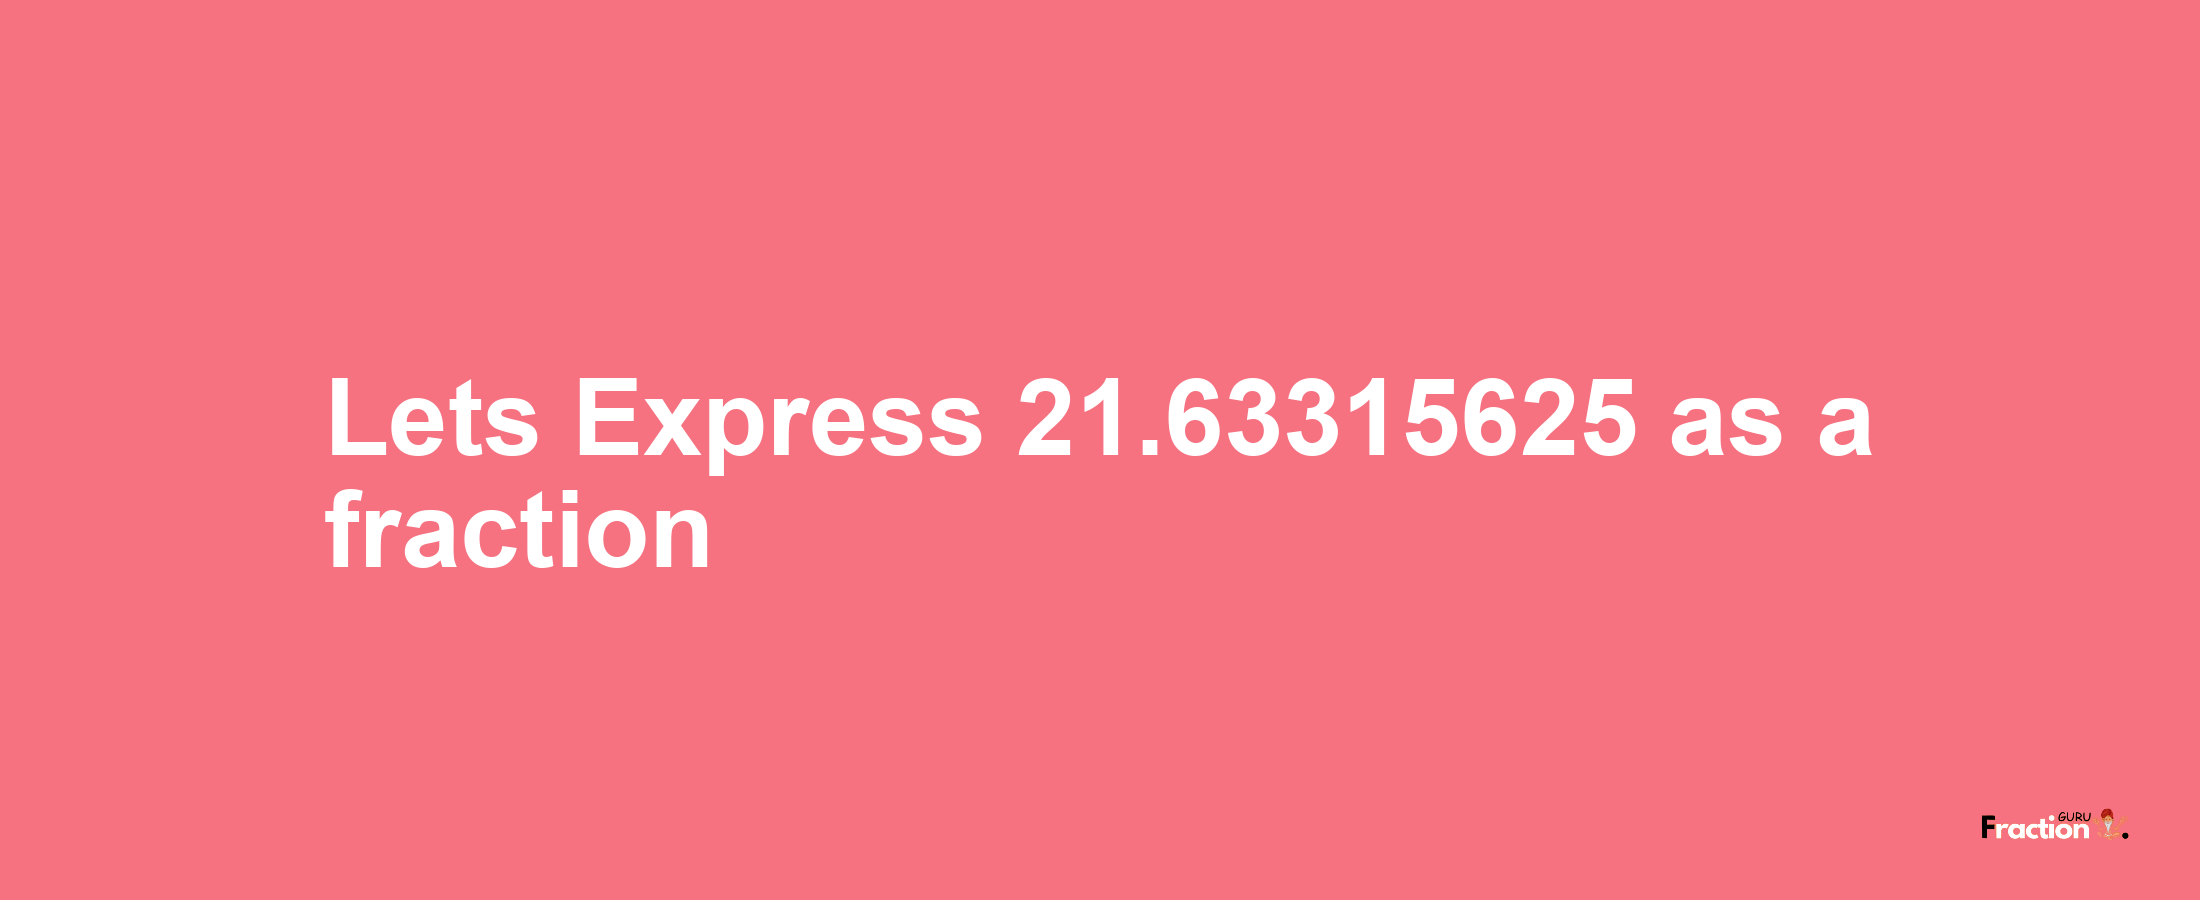 Lets Express 21.63315625 as afraction